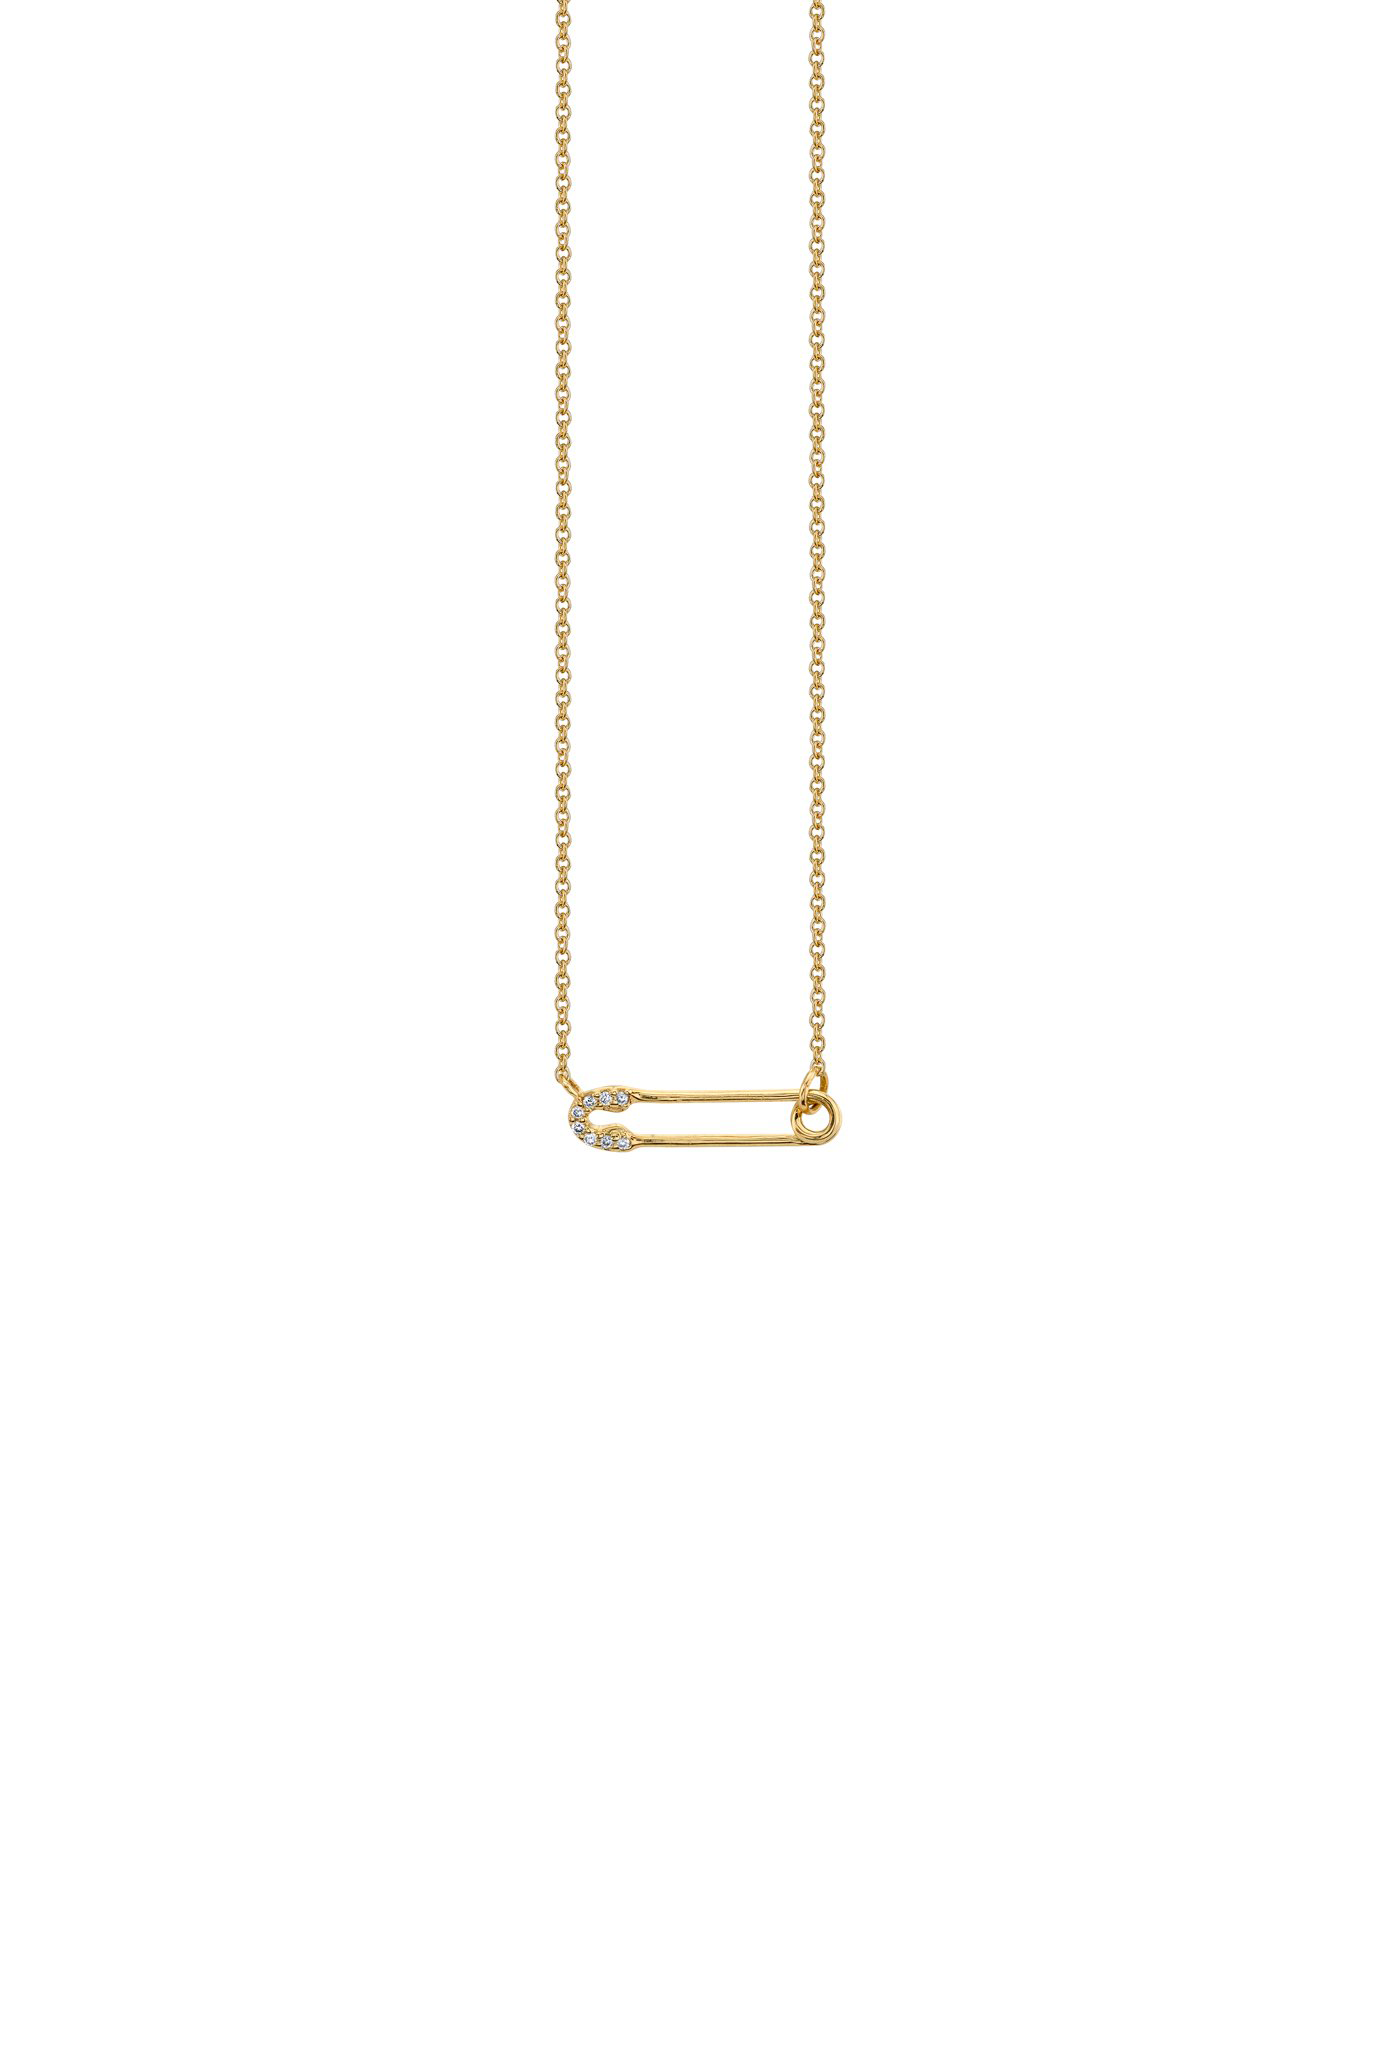 14k Yellow Gold Diamond Safety Pin Necklace